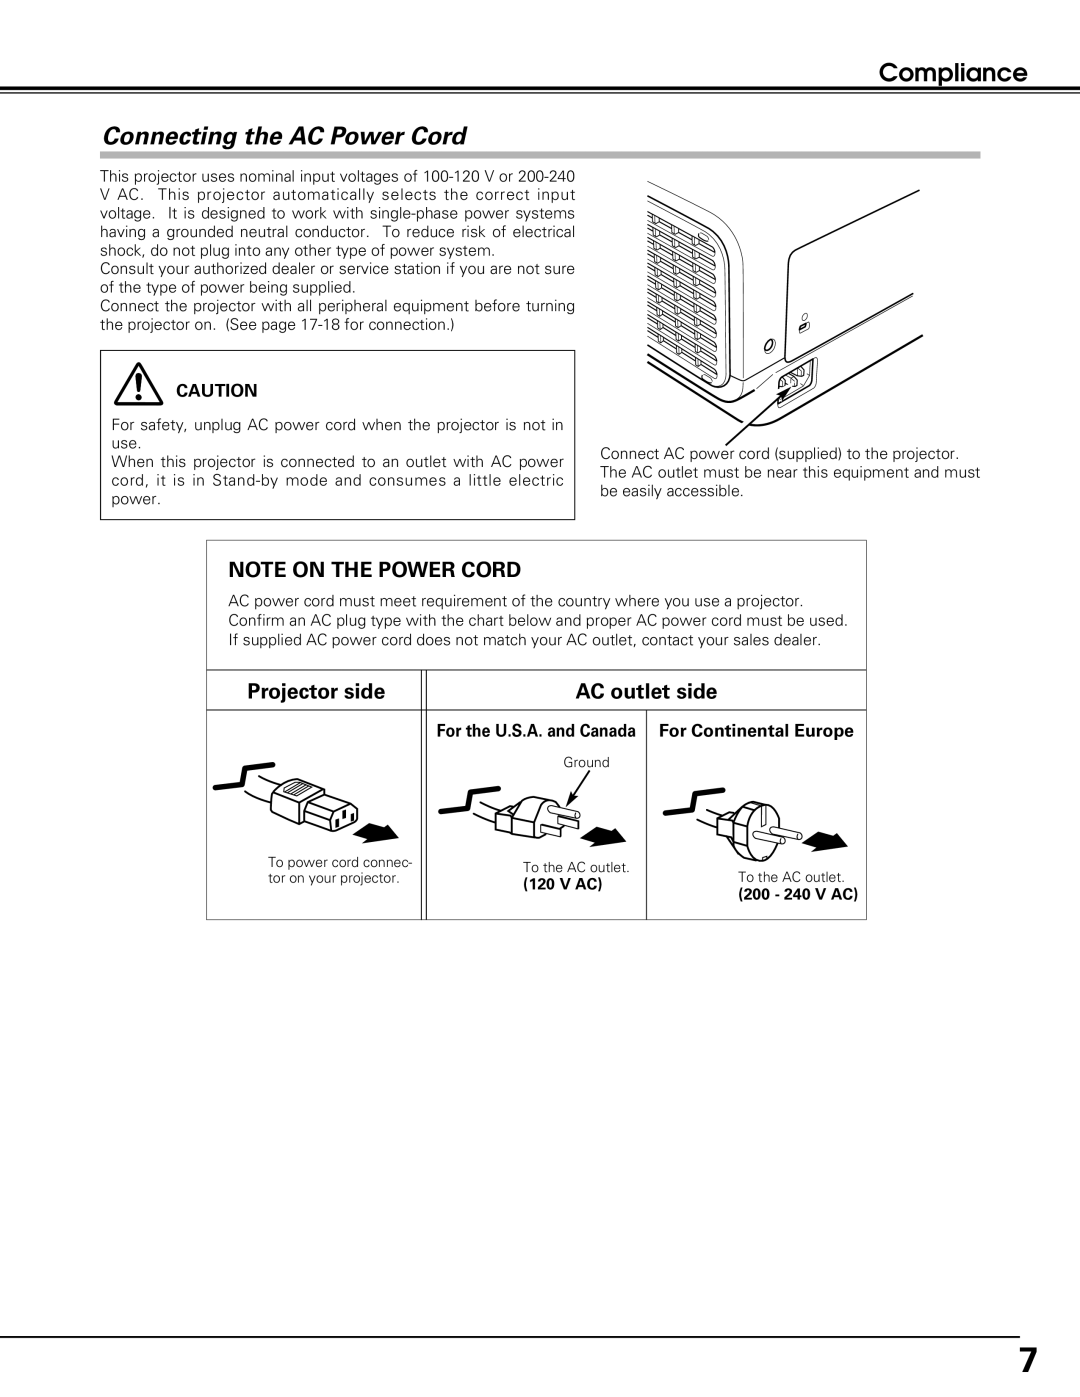 Black Box LC-XE10 Compliance, Connecting the AC Power Cord, For the U.S.A. and Canada, V Ac, 200 - 240 V AC 